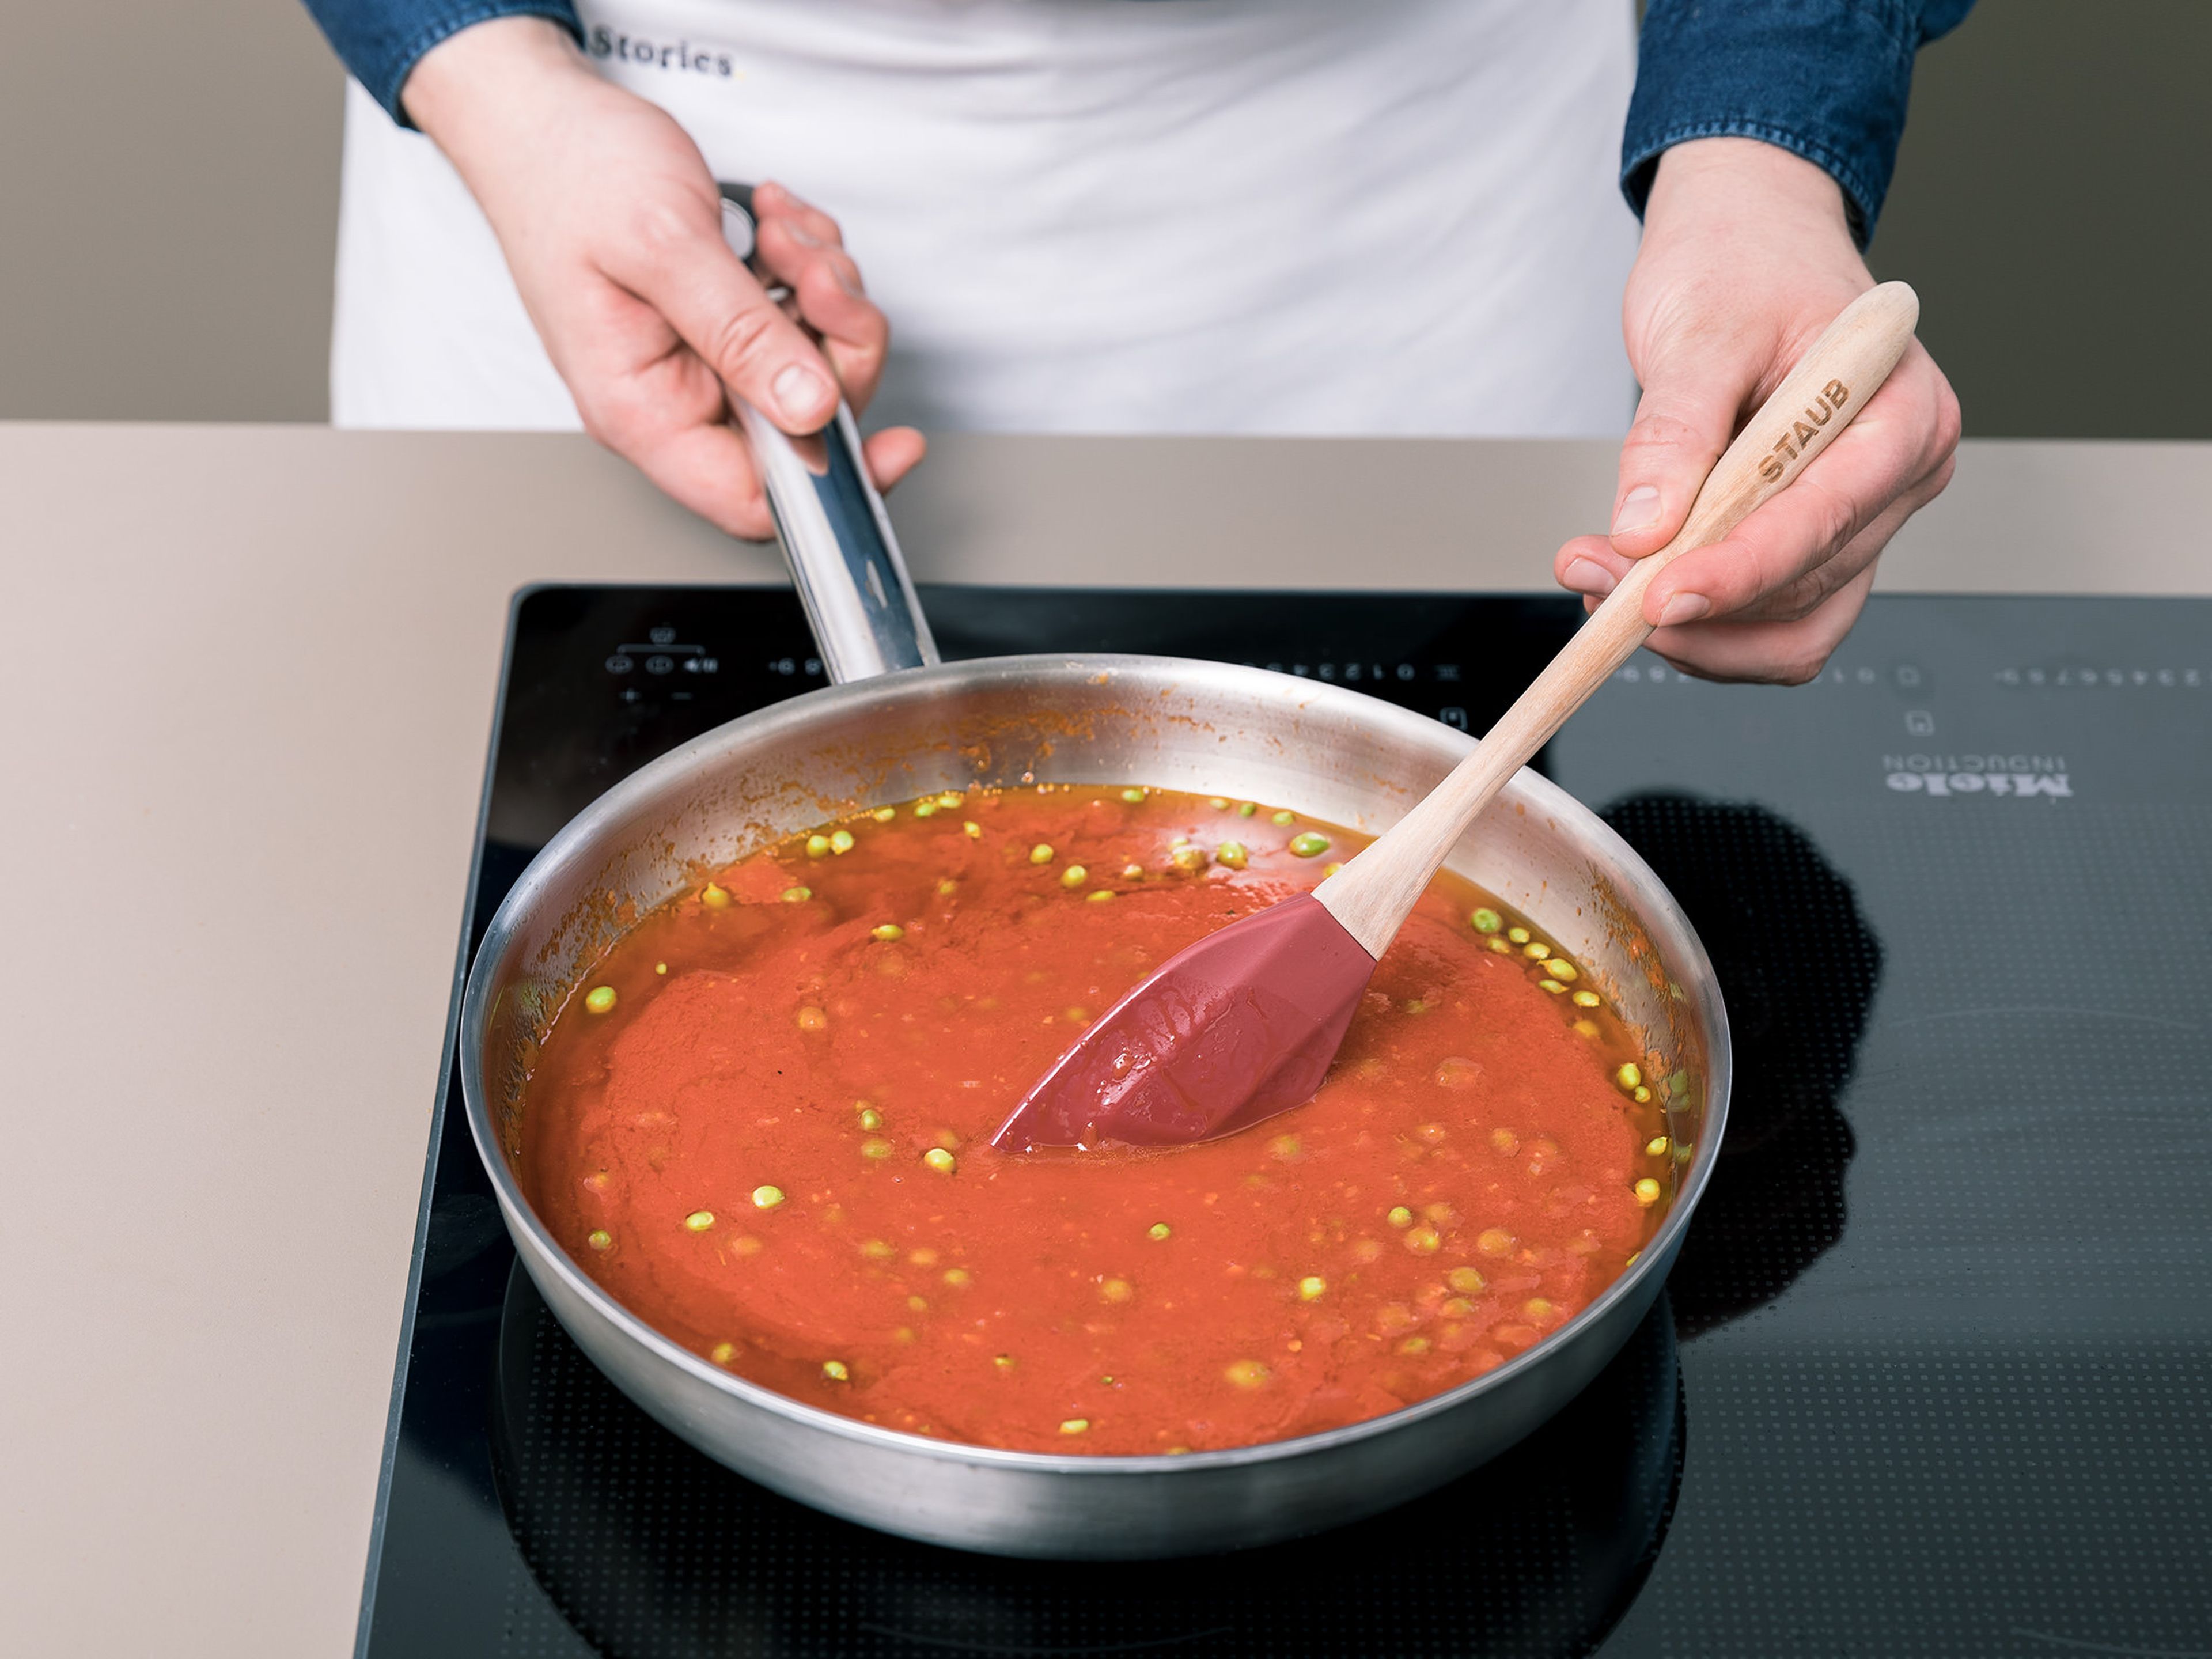 Add the tomato paste and vodka and carefully light with a flambé torch or match. Once the fire is out, add vegetable broth, tomato purée, fresh peas, and chili flakes. Let sauce simmer for approx. 10 min. Cook pasta according to package instructions and drain.